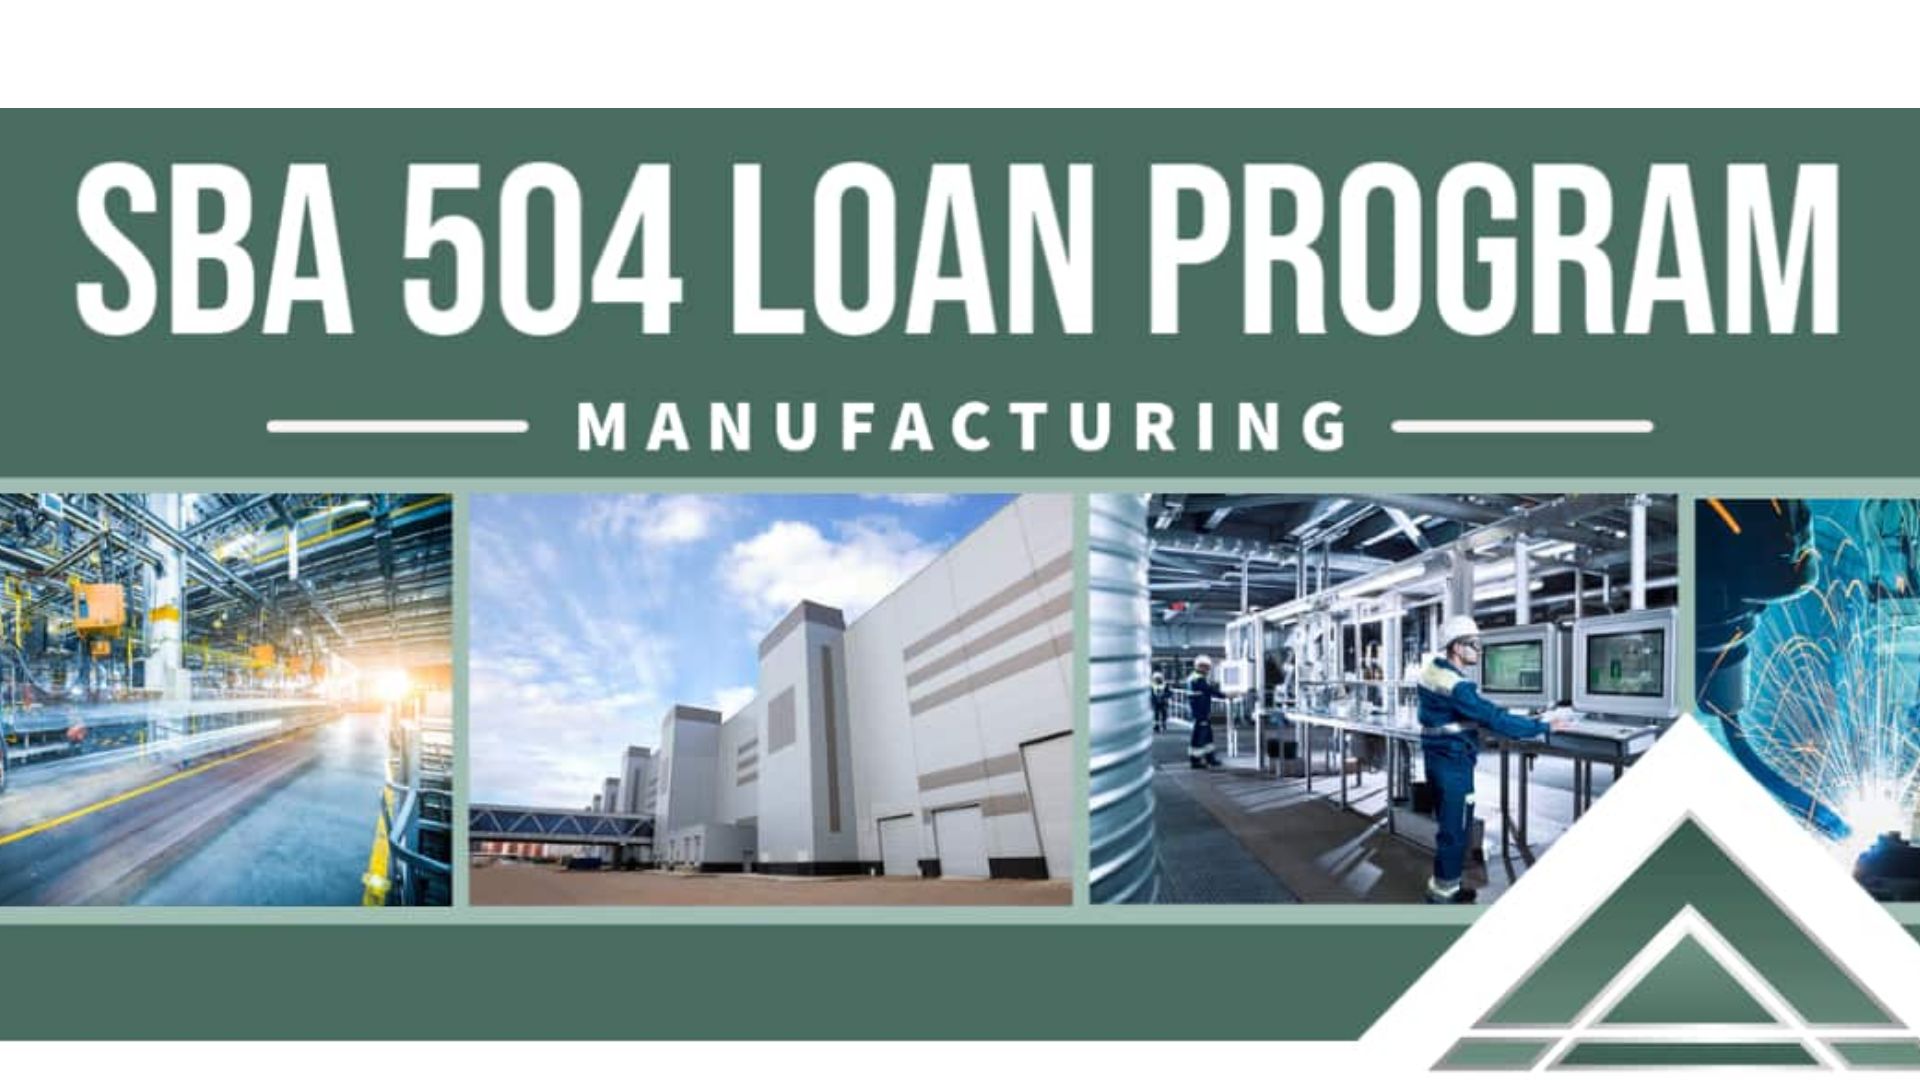 The 504 Loan for Real Estate Ventures.